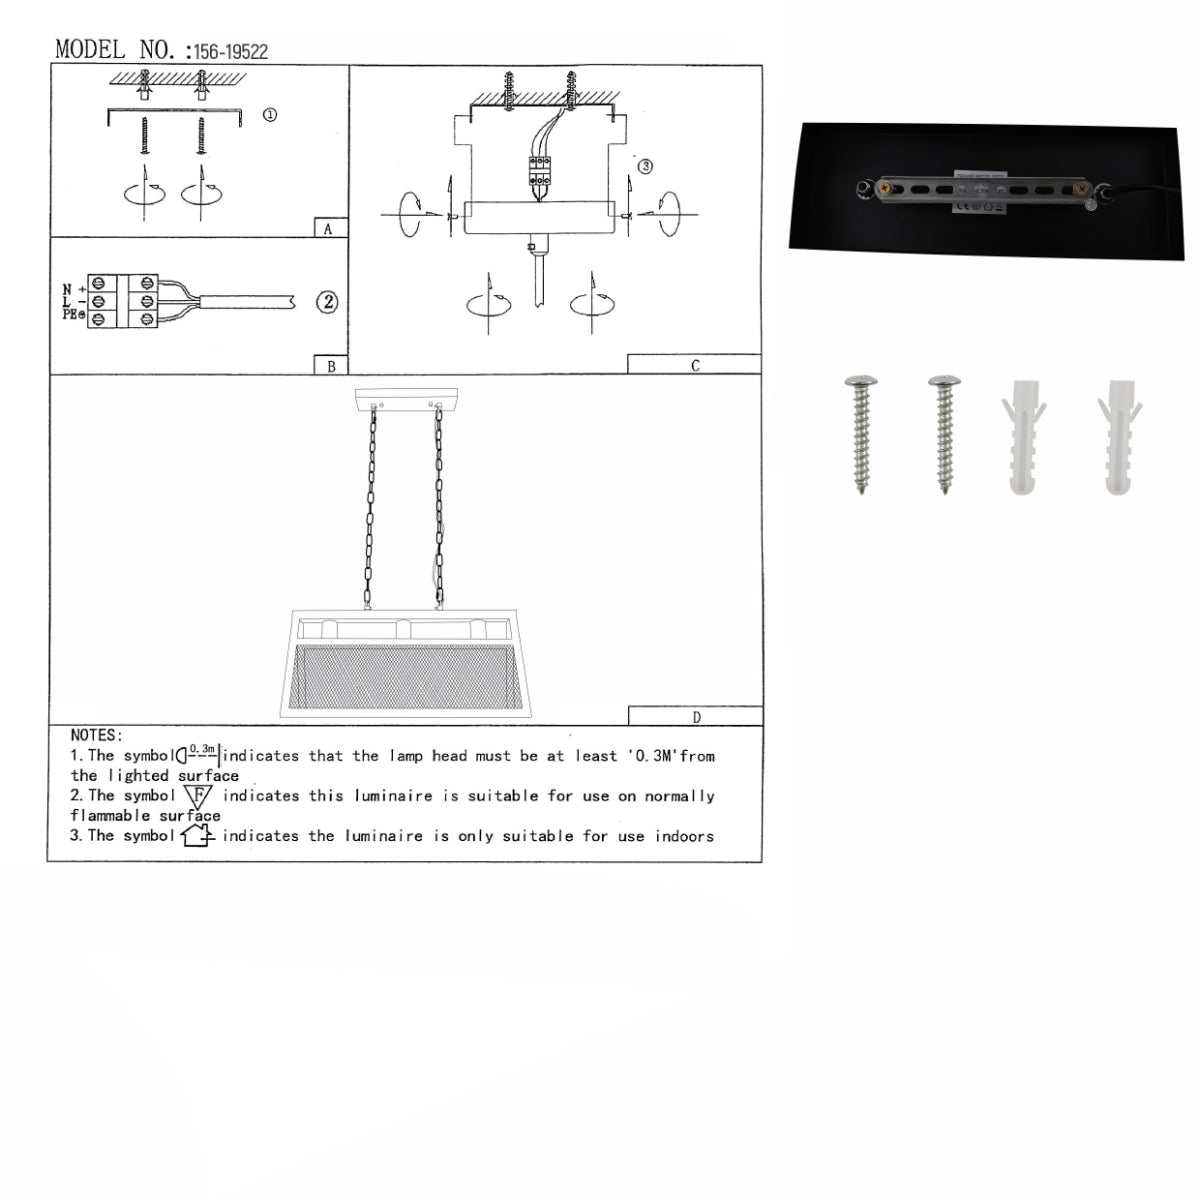 User manual for Black Metal Island Chandelier Ceiling Light with 3xE27 Fitting | TEKLED 156-19522